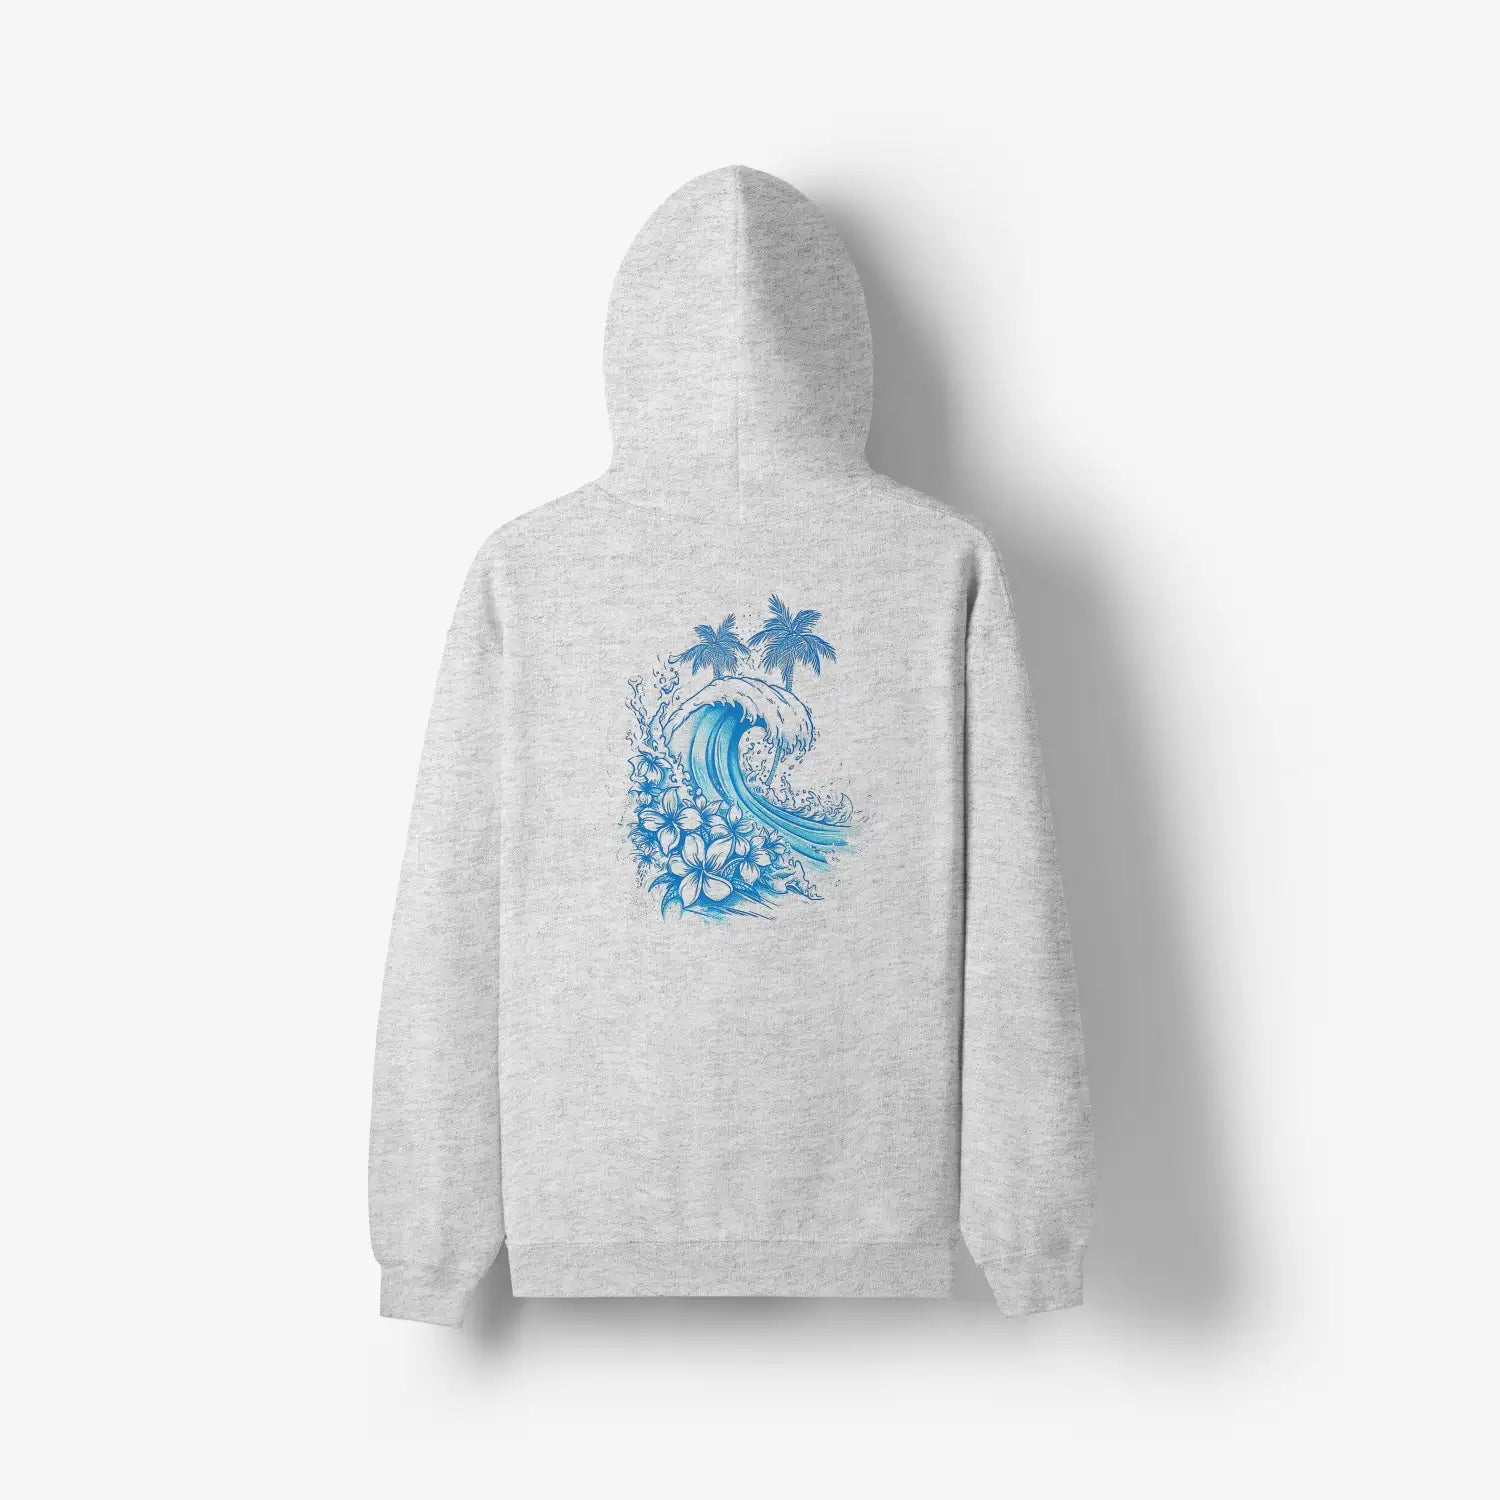 Introducing the Be Still and Know Kupa'a Tide Hoodie, a stylish Hawaiian-themed apparel with an unwavering faith-inspired design. This trendy hoodie features a unique combination of a grey base color, complement.